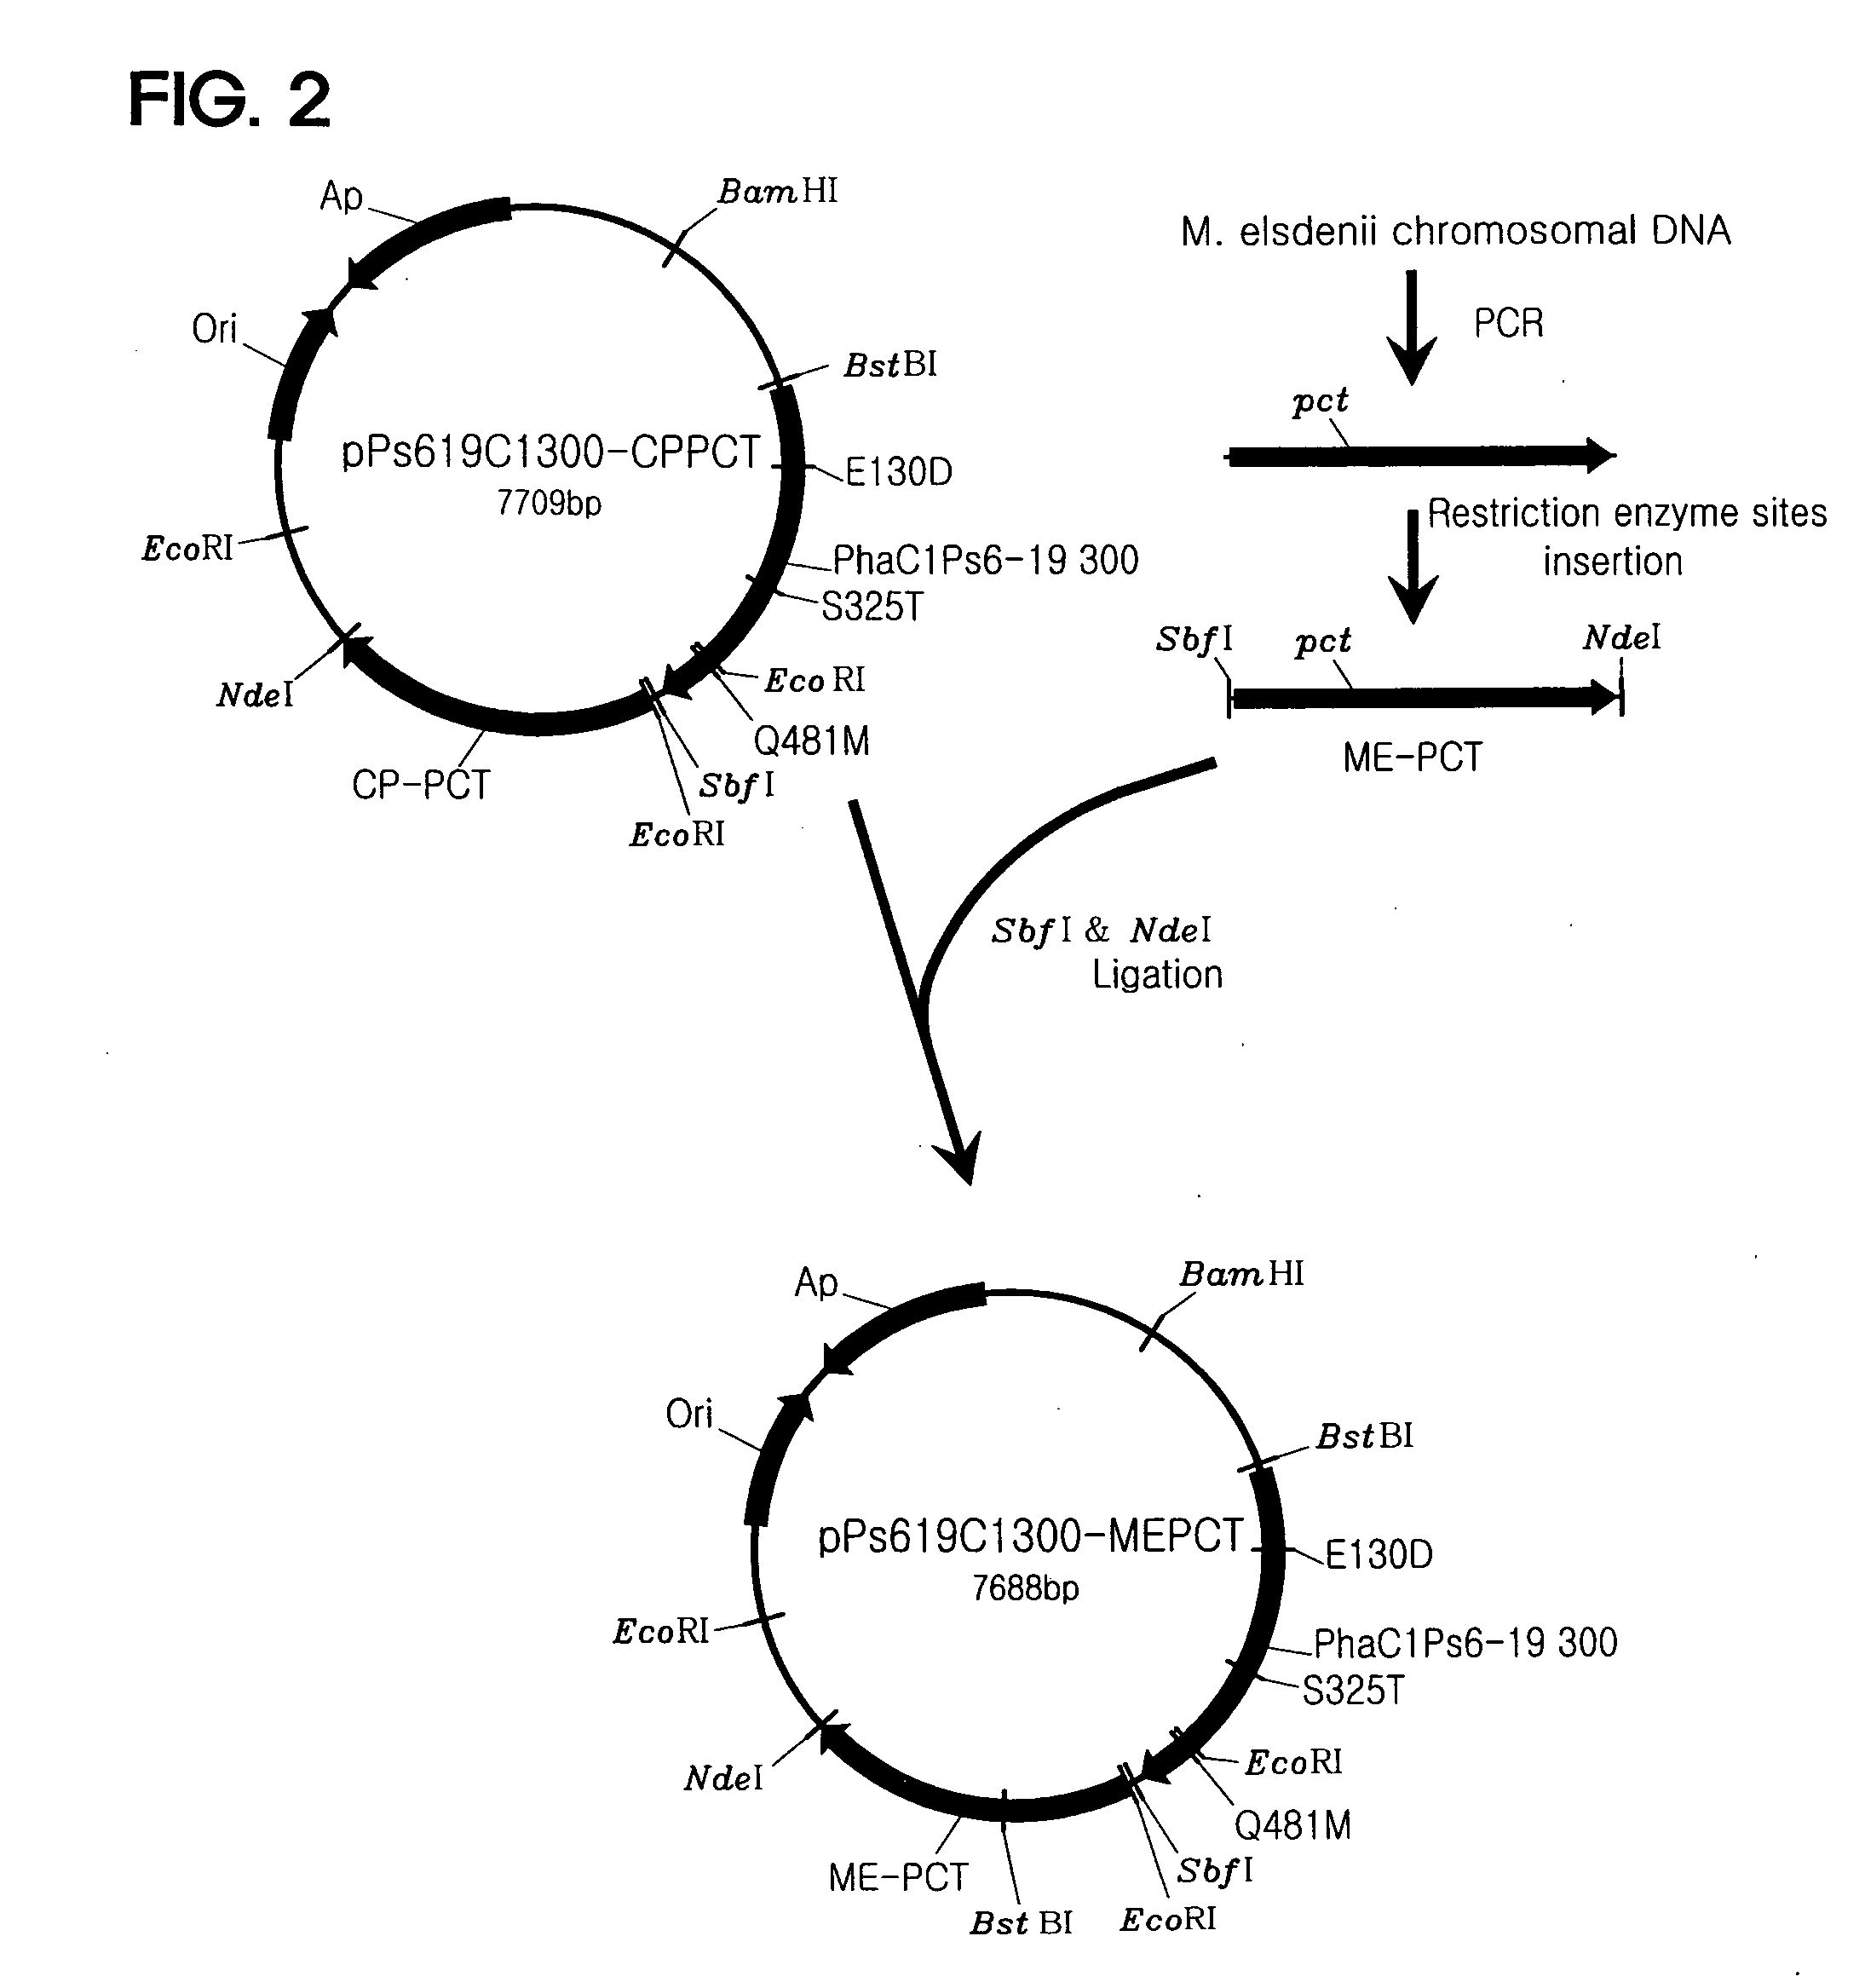 Recombinant microorganism having a producing ability of polylactate or its copolymers and method for preparing polyactate or its copolymers using the same